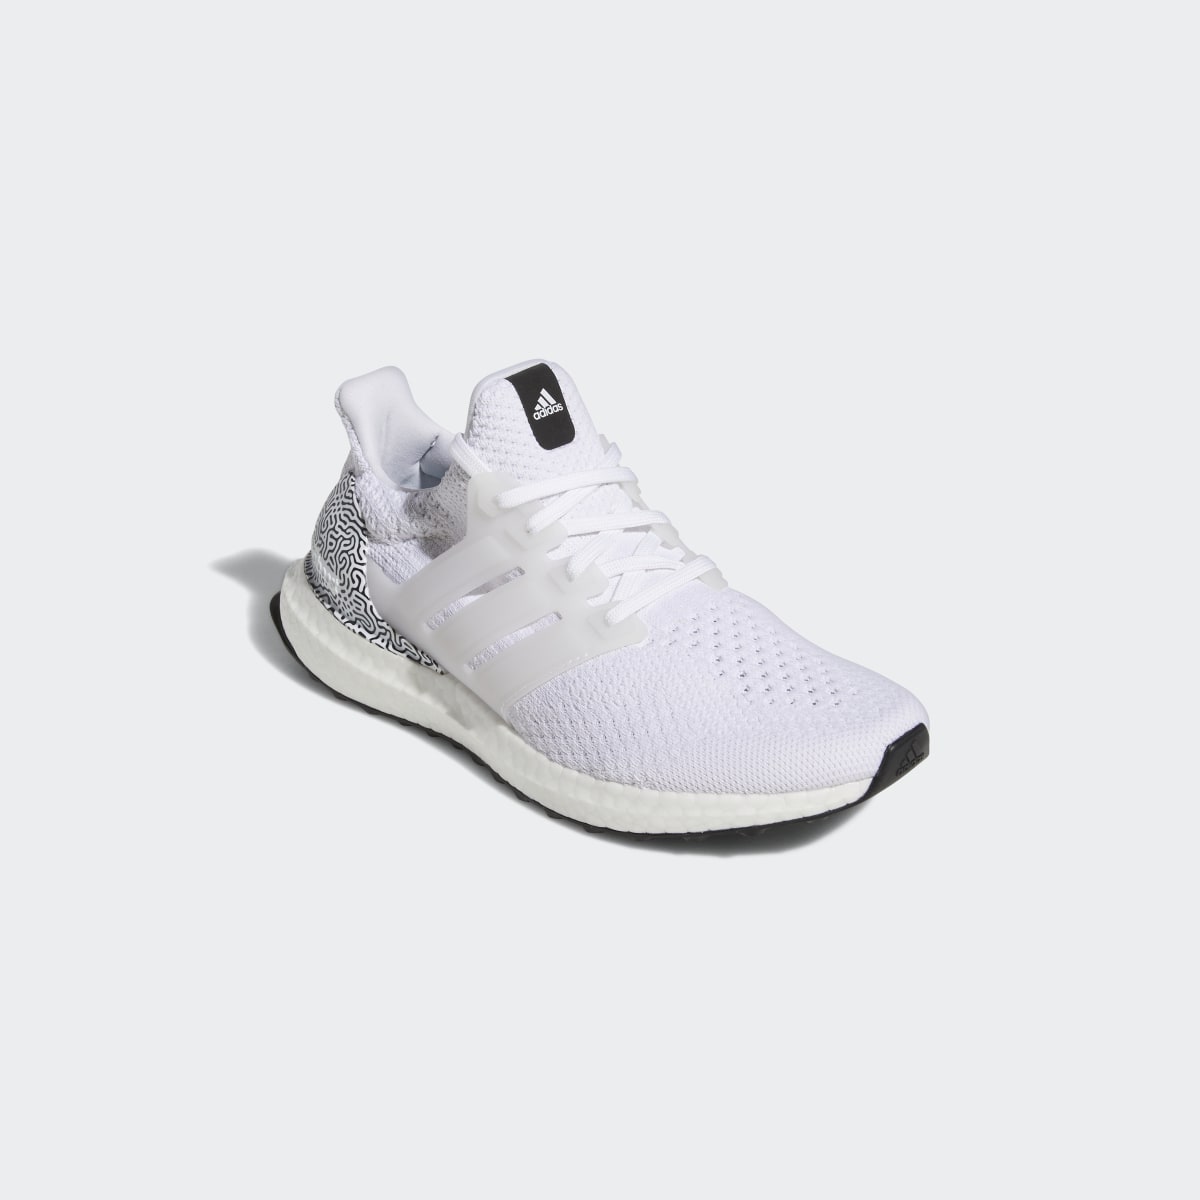 Adidas ULTRABOOST DNA SHOES. 8